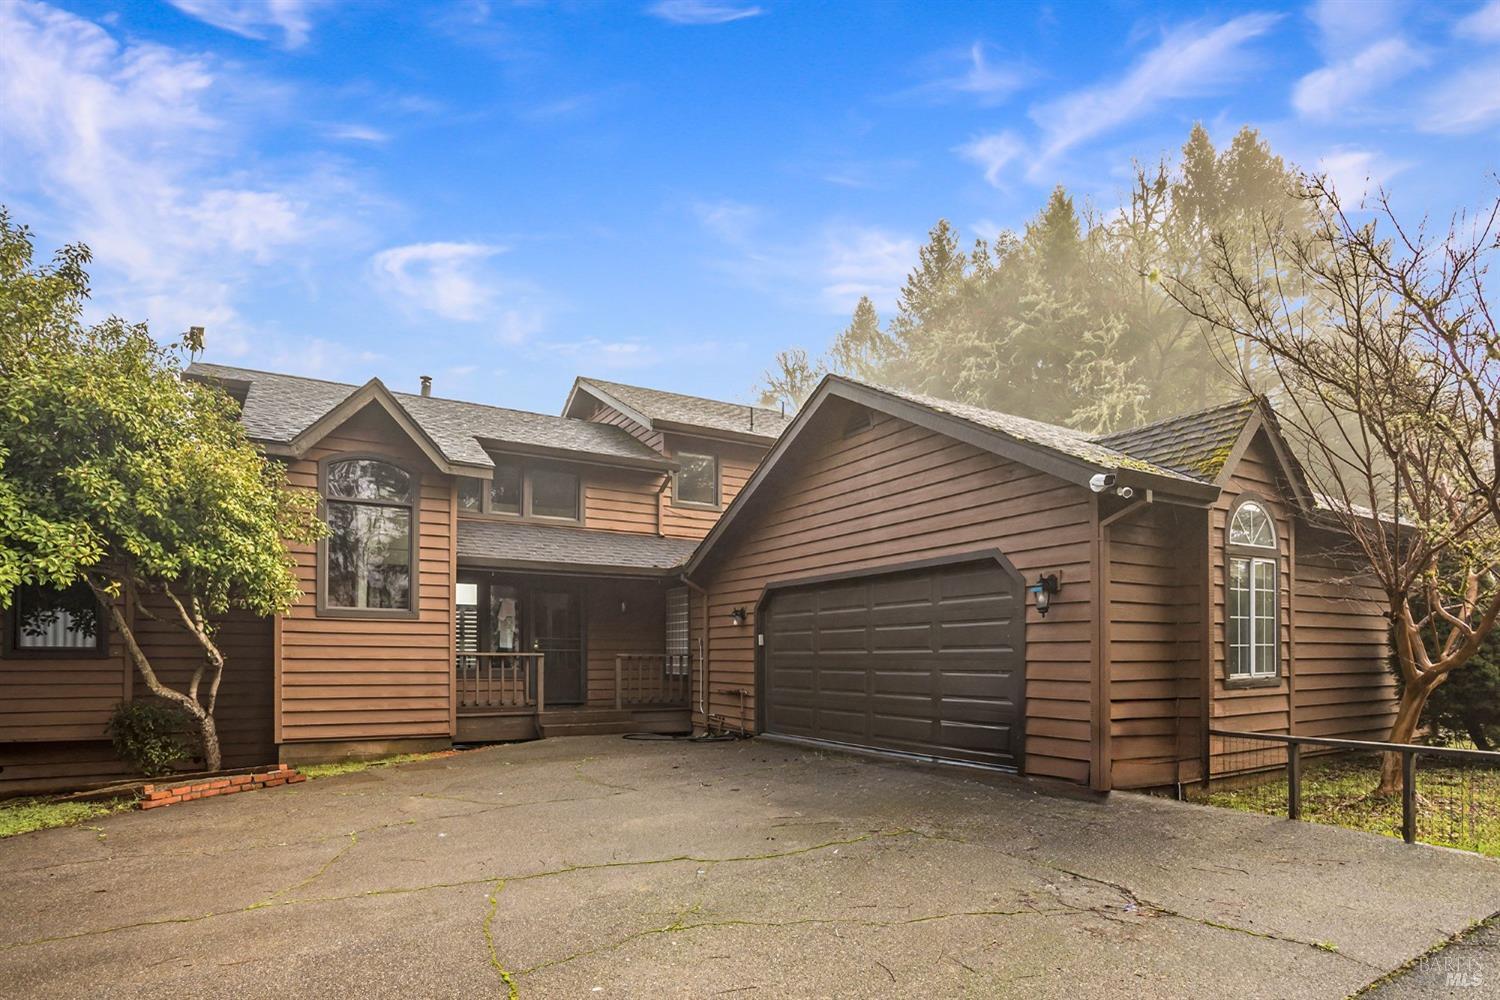 Photo of 24471 Sherwood Rd in Willits, CA